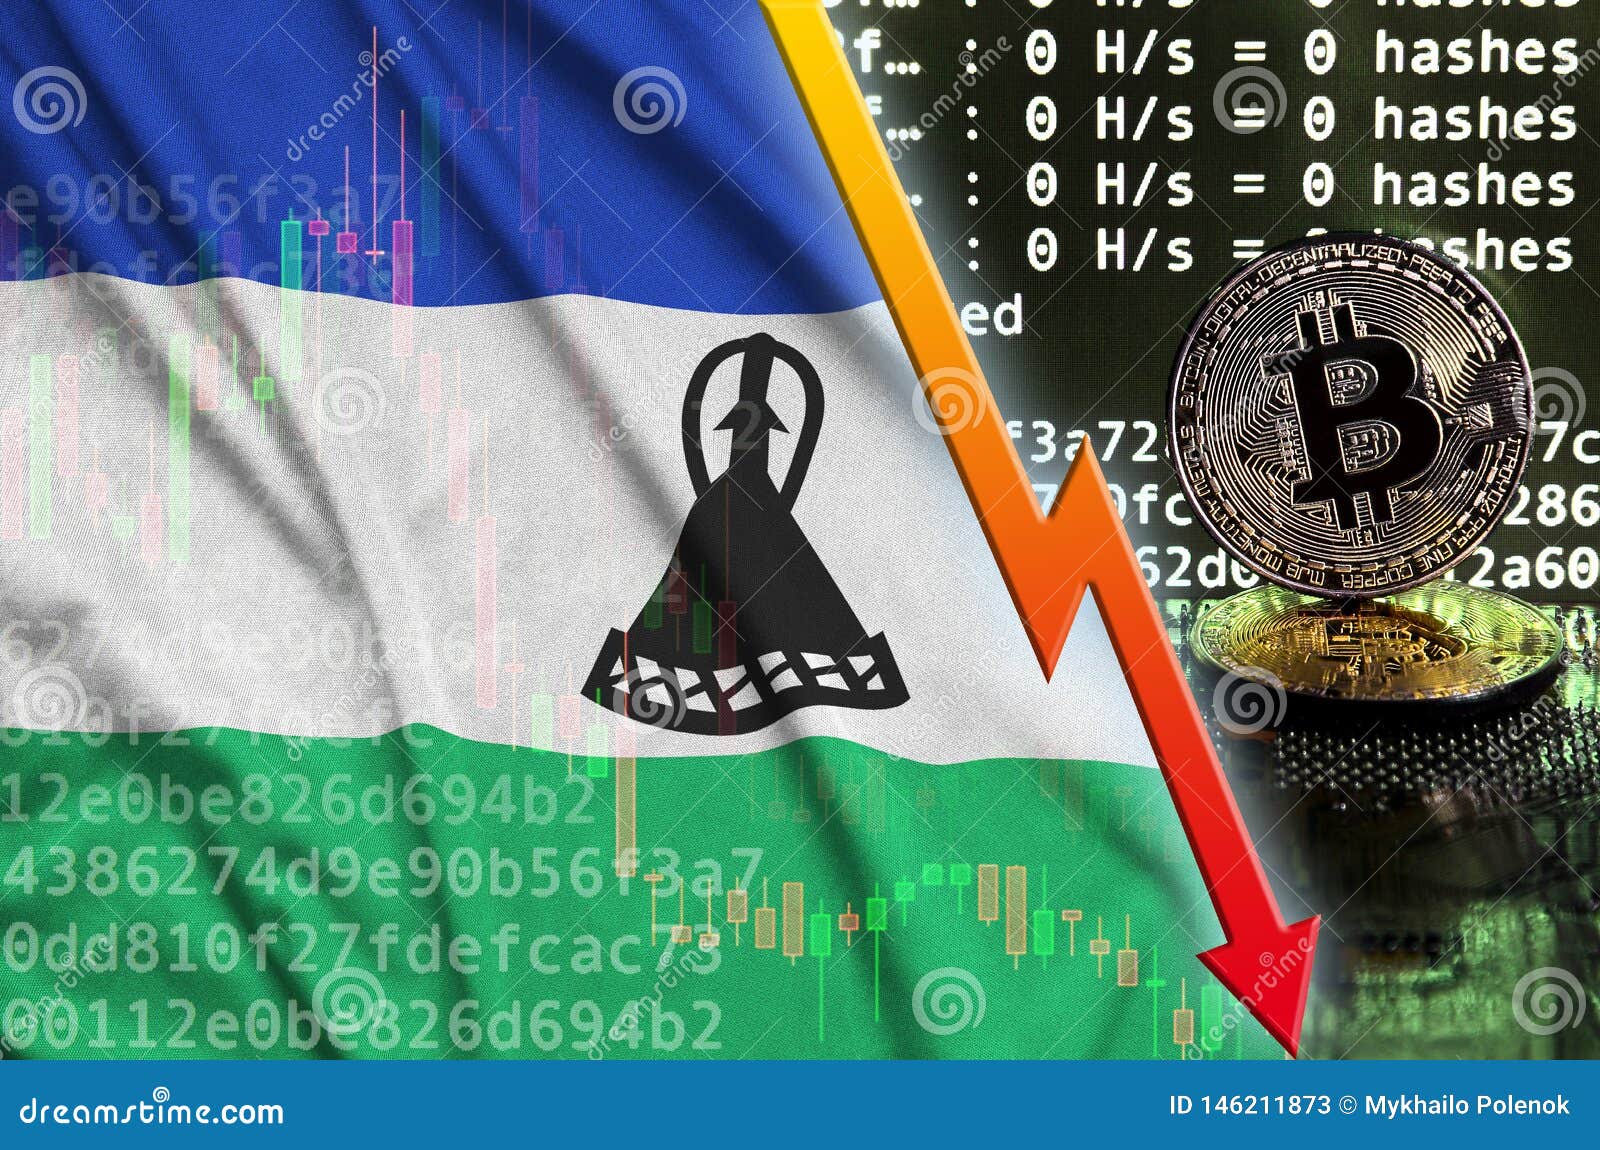 how to buy bitcoin in lesotho